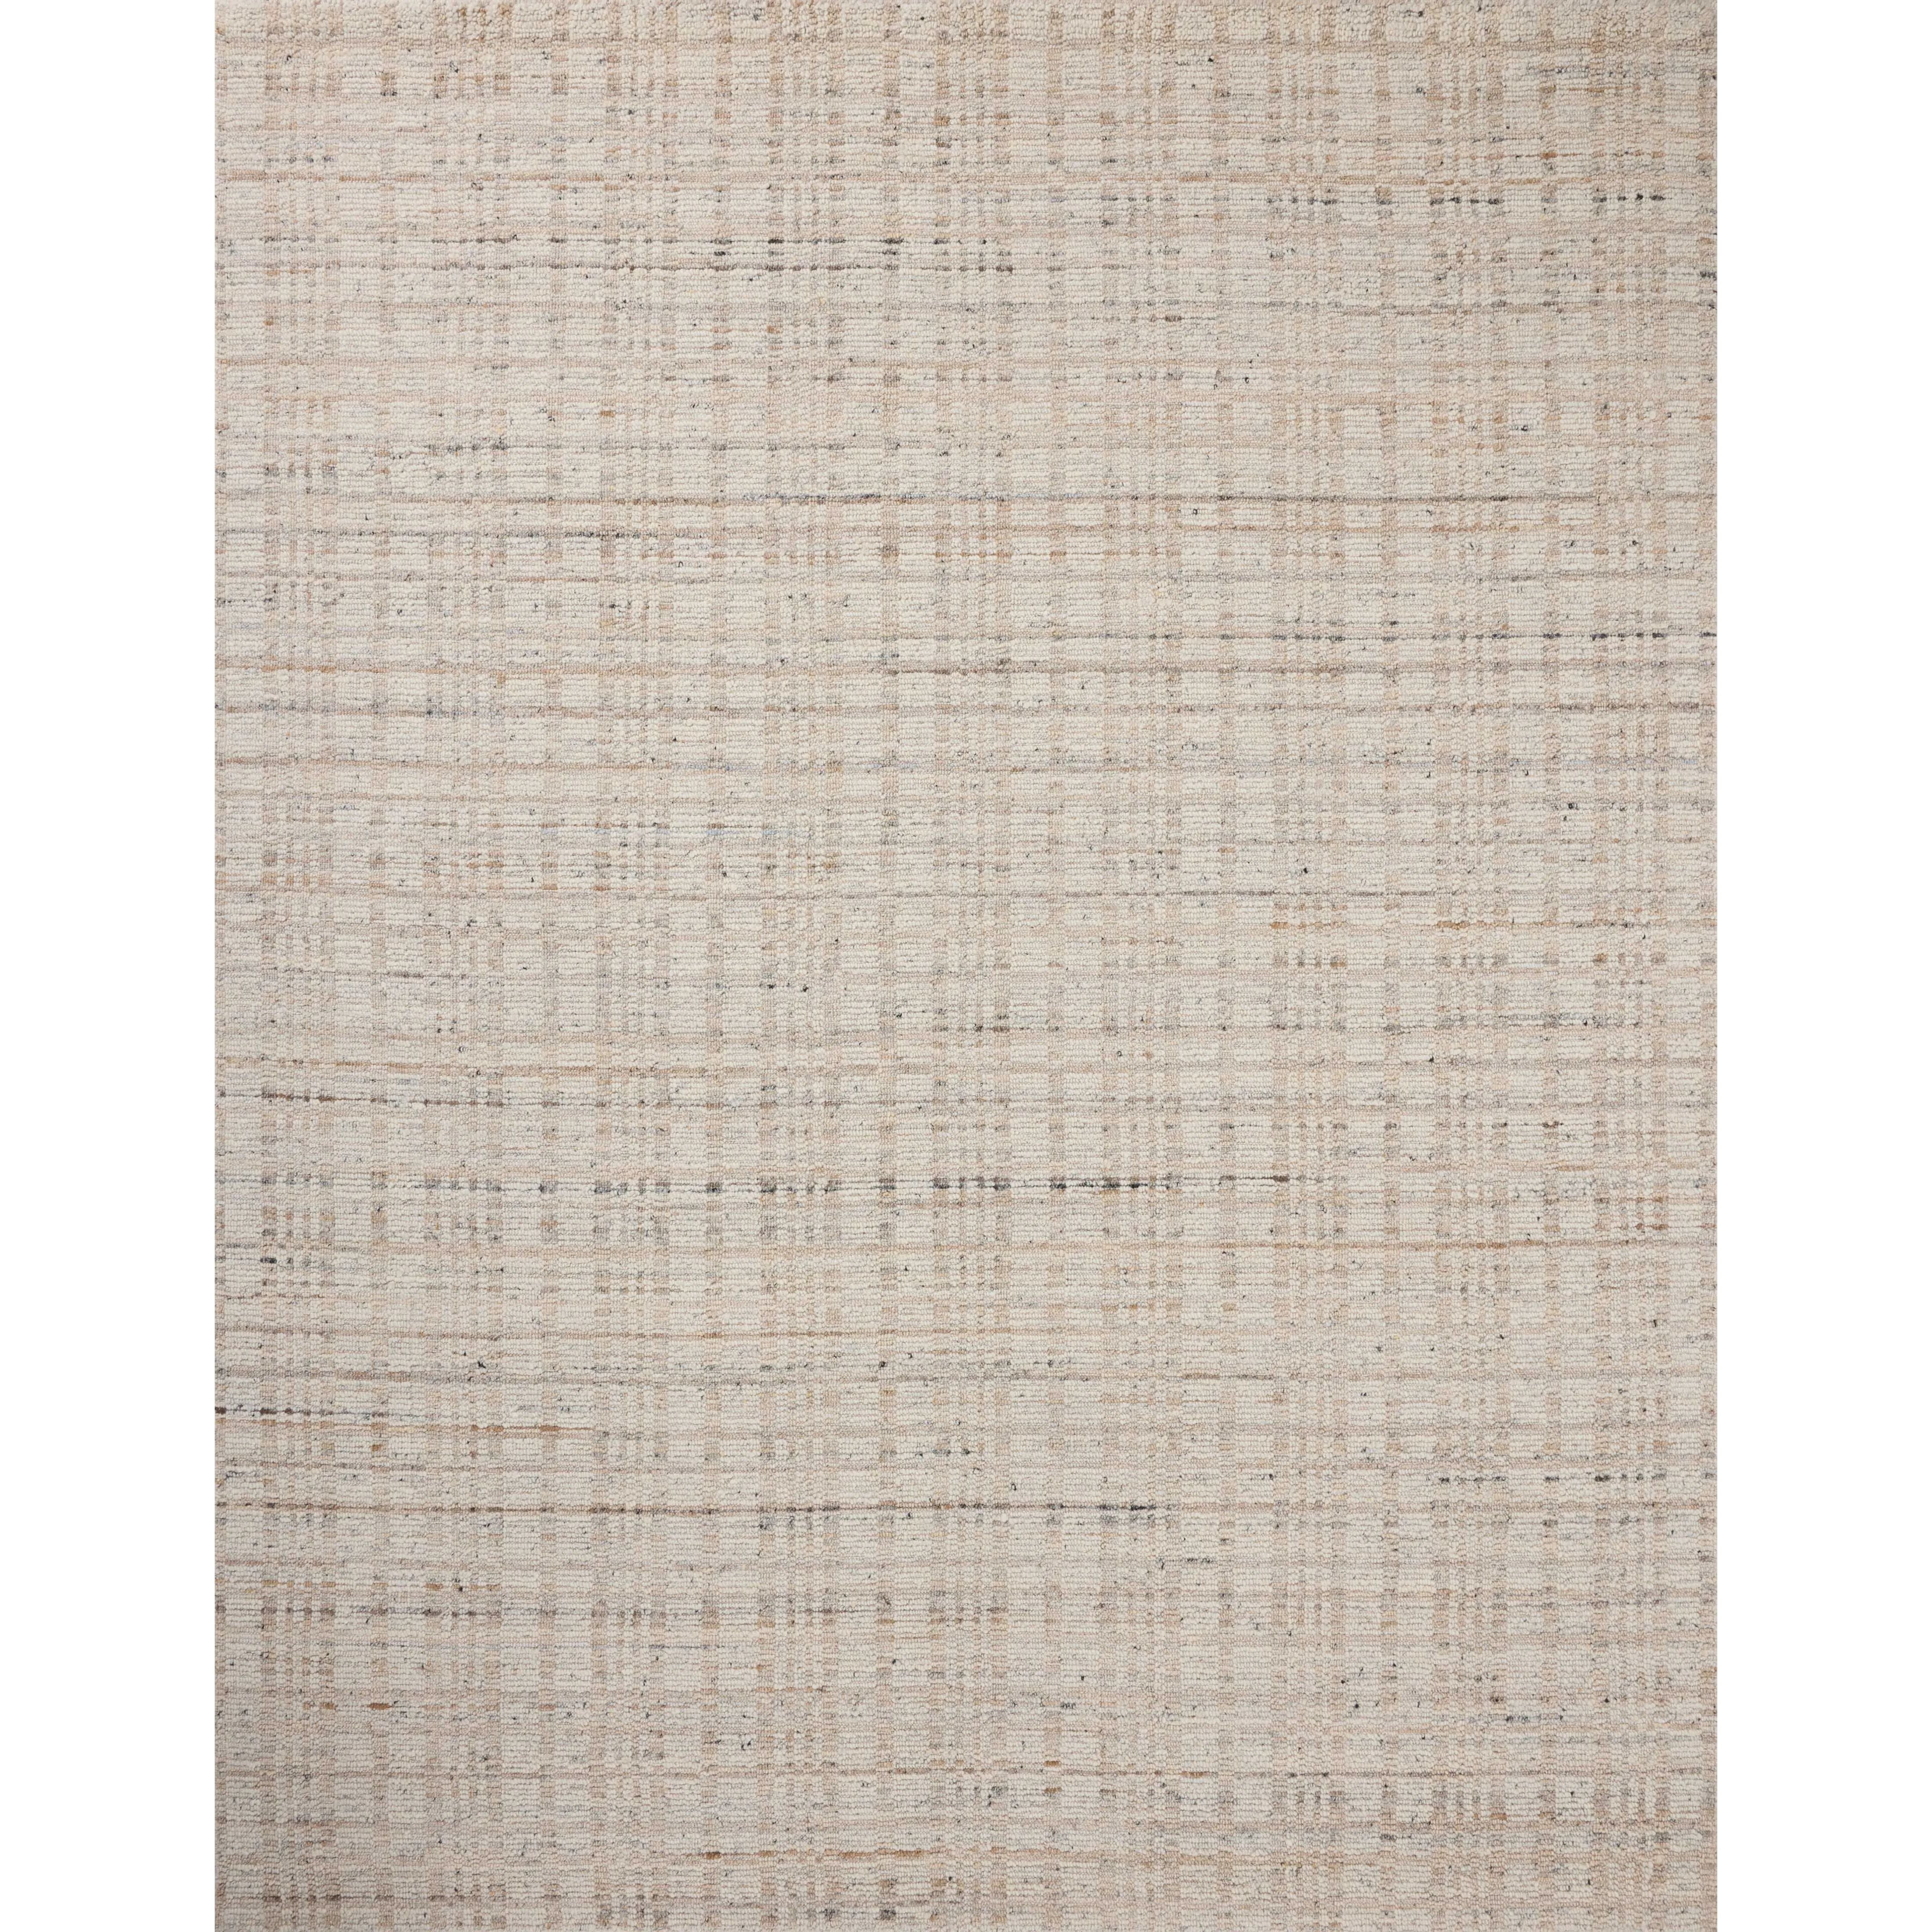 The Sonya Ivory / Natural Rug is a hand-loomed area rug with a light, airy palette and understated graphic design. The rug’s textural pile is a soft blend of wool and nylon that creates dimension in living rooms, bedrooms, and more. Amethyst Home provides interior design, new home construction design consulting, vintage area rugs, and lighting in the Portland metro area.